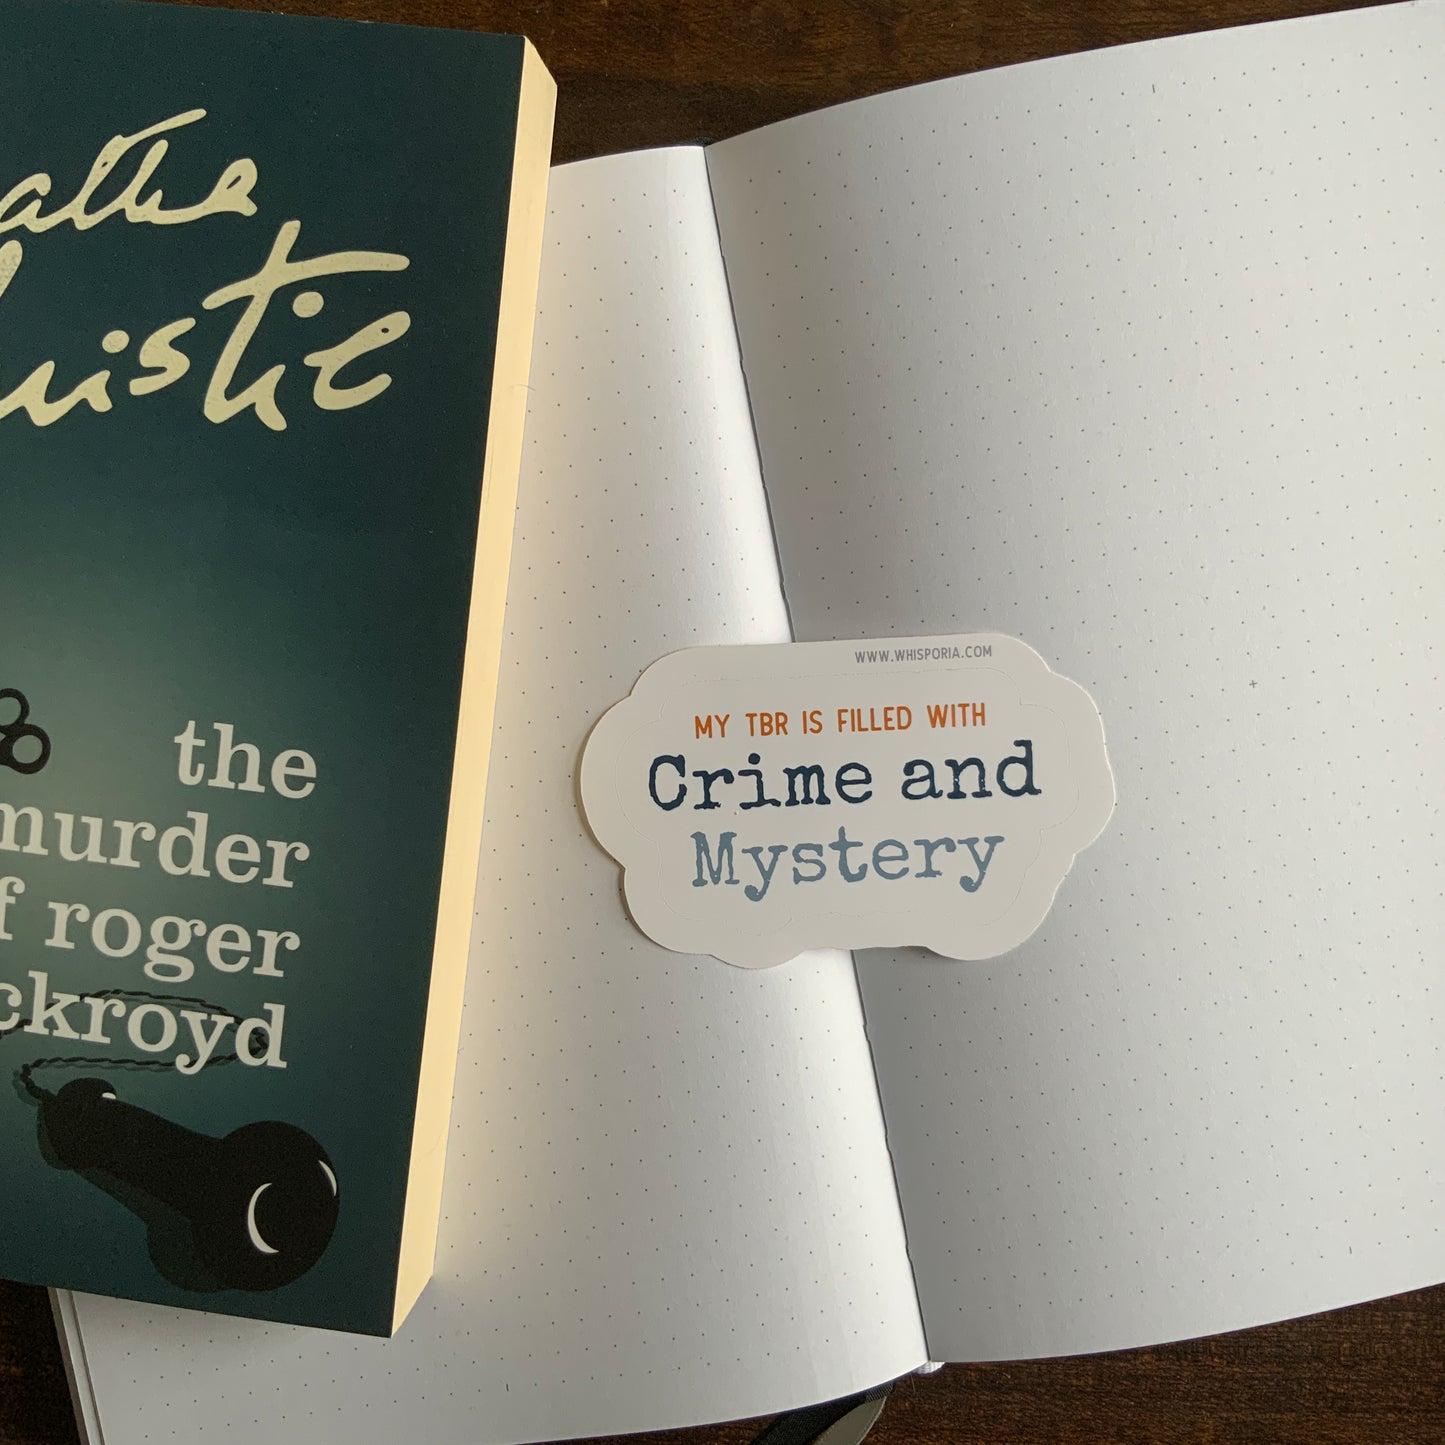 My TBR is filled with...Crime & Mystery